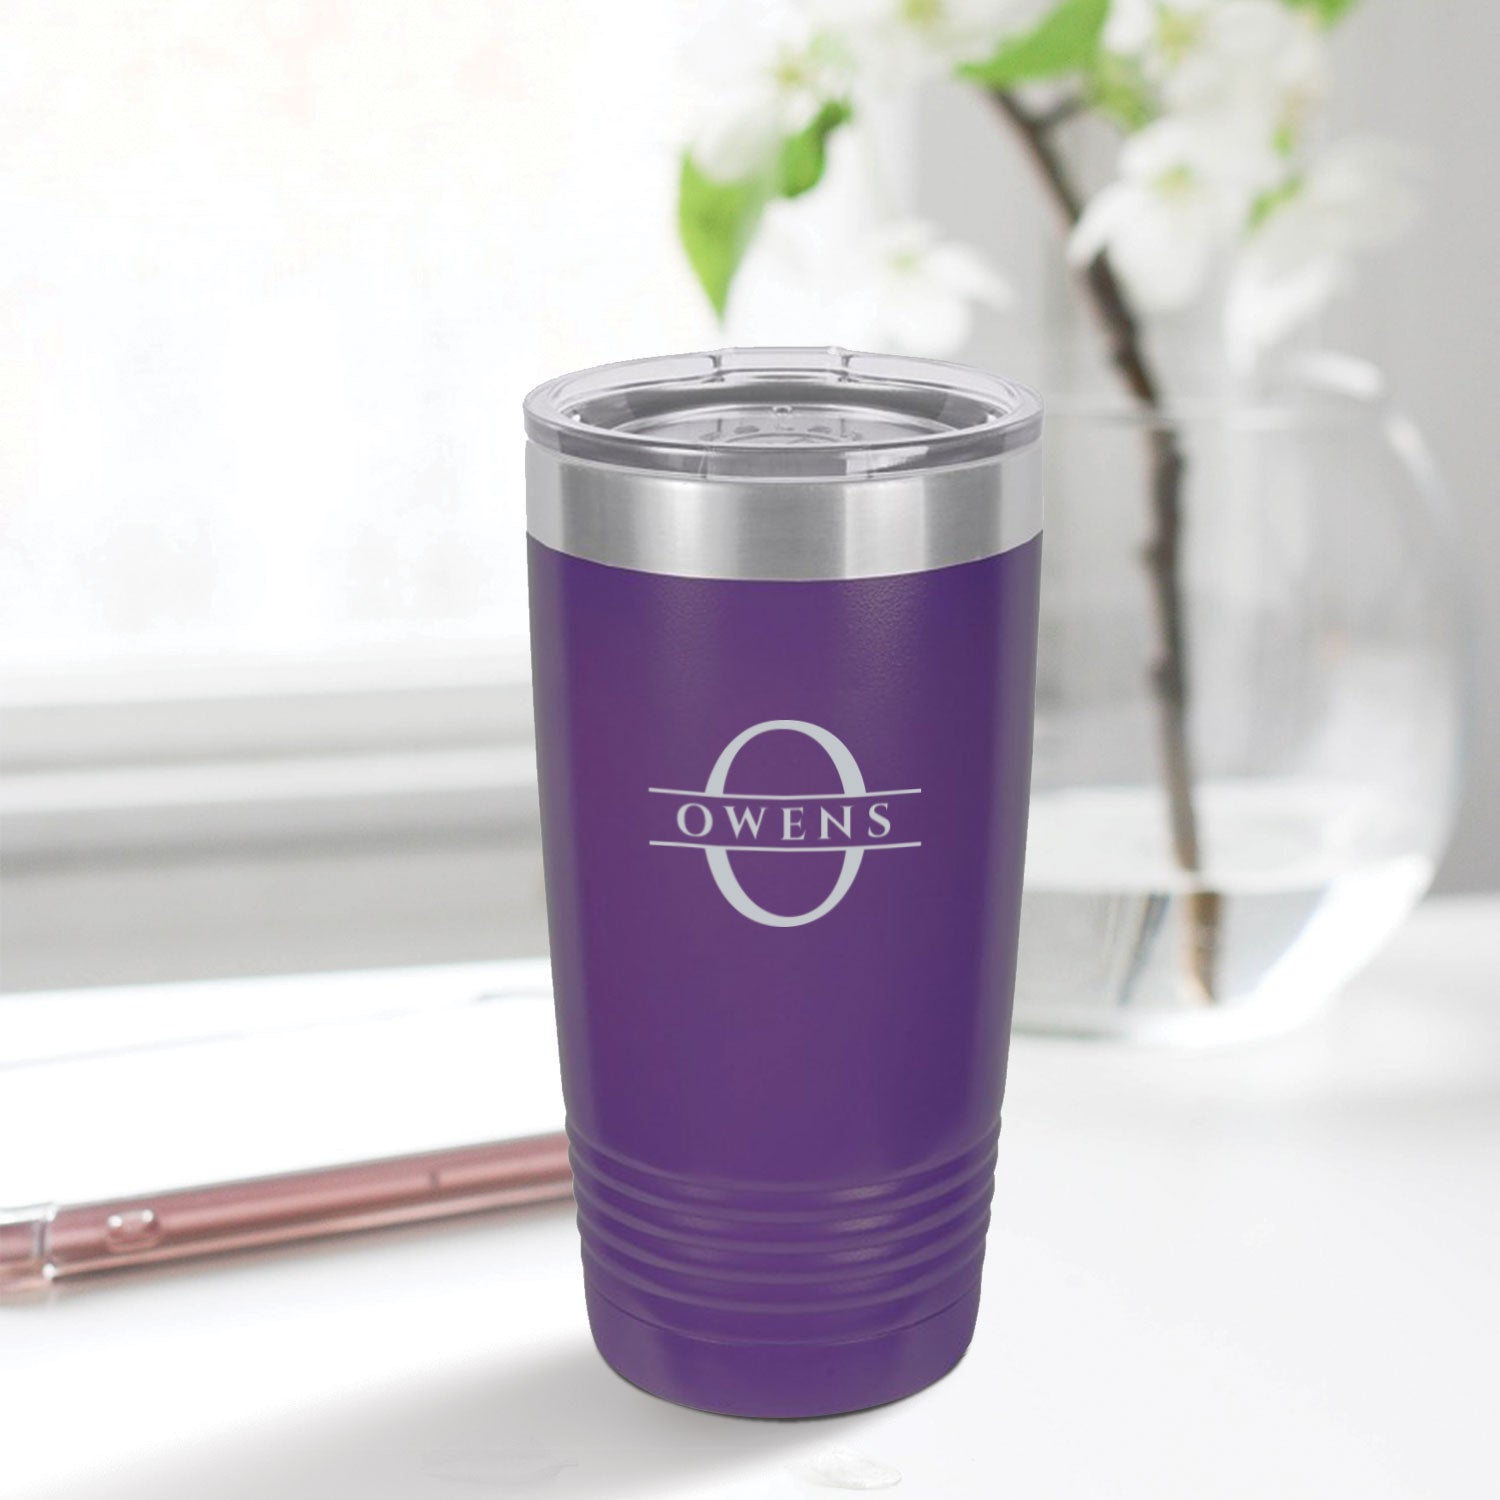 custom engraved tumbler mug with name and initial for closing gifts and best sellers